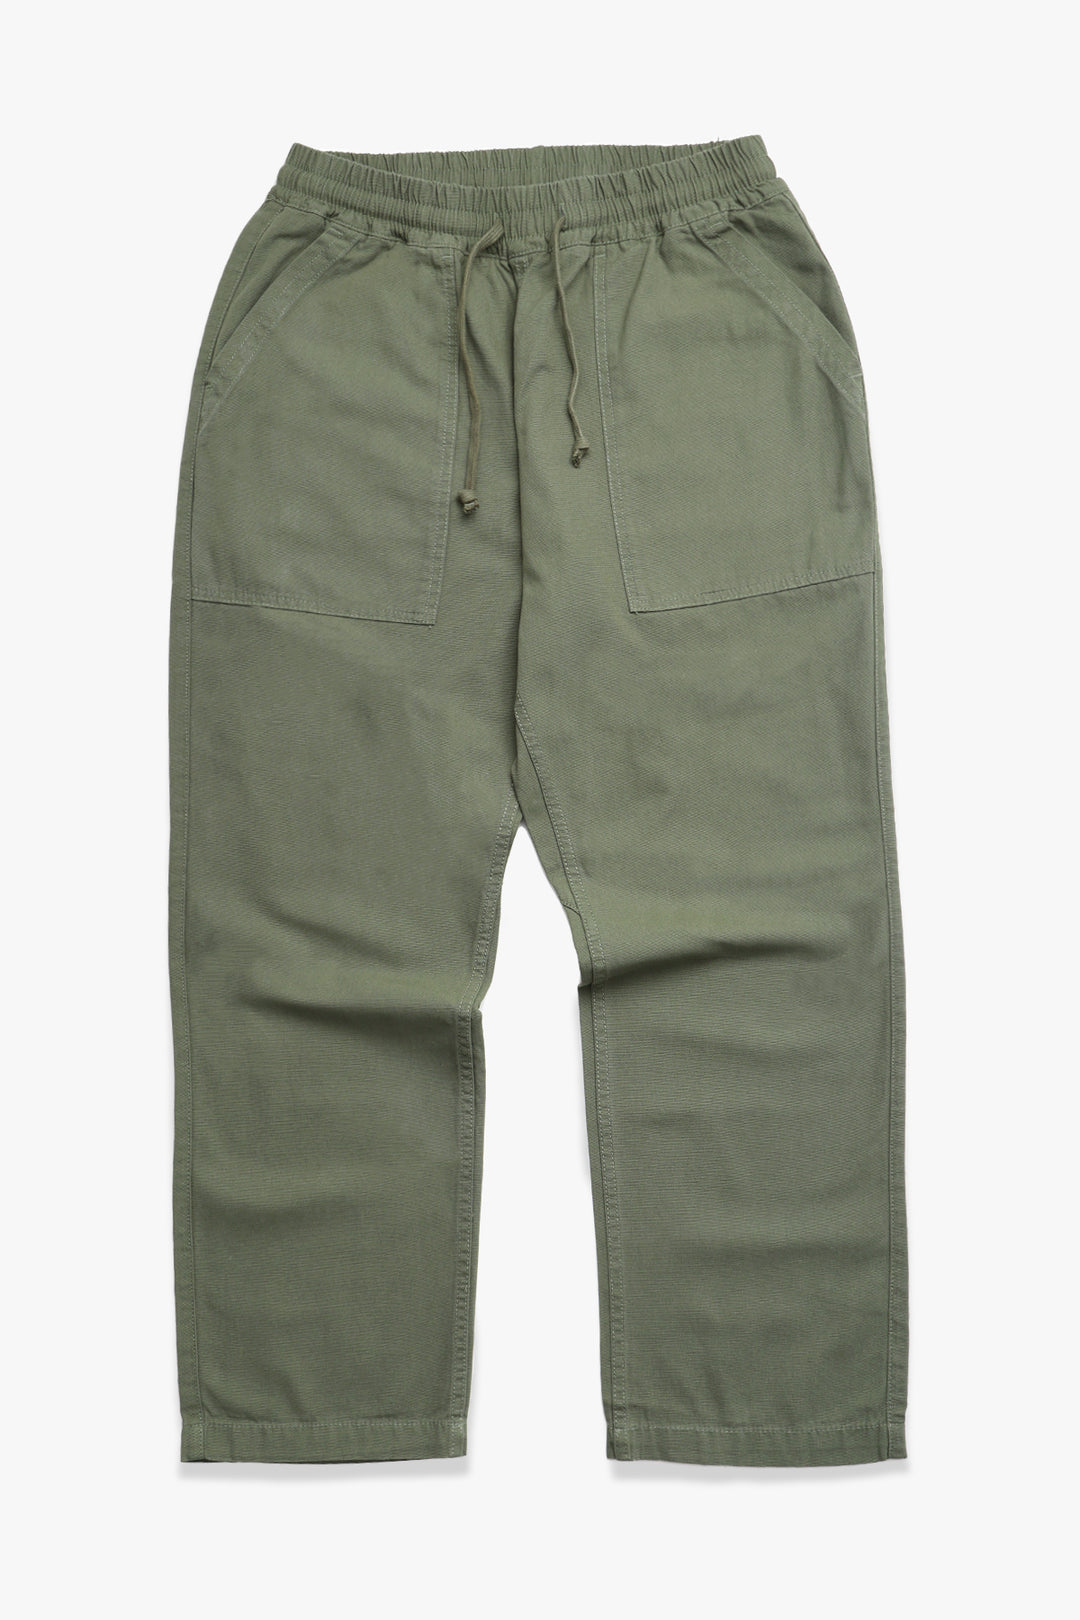 Service Works - Trade Chef Pants - Olive – Blacksmith Store